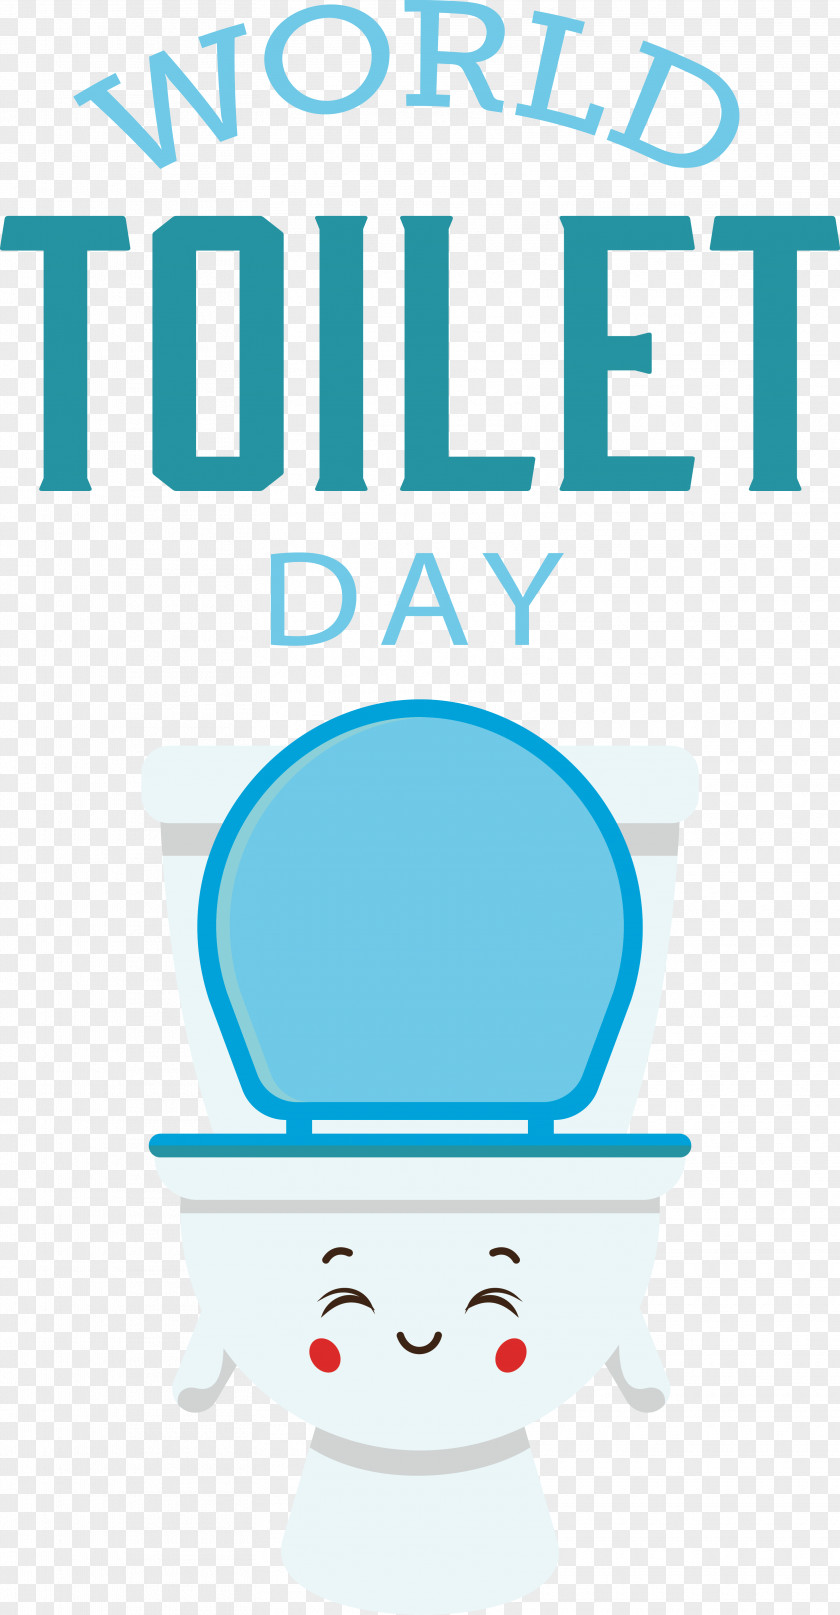 World Toilet Day PNG